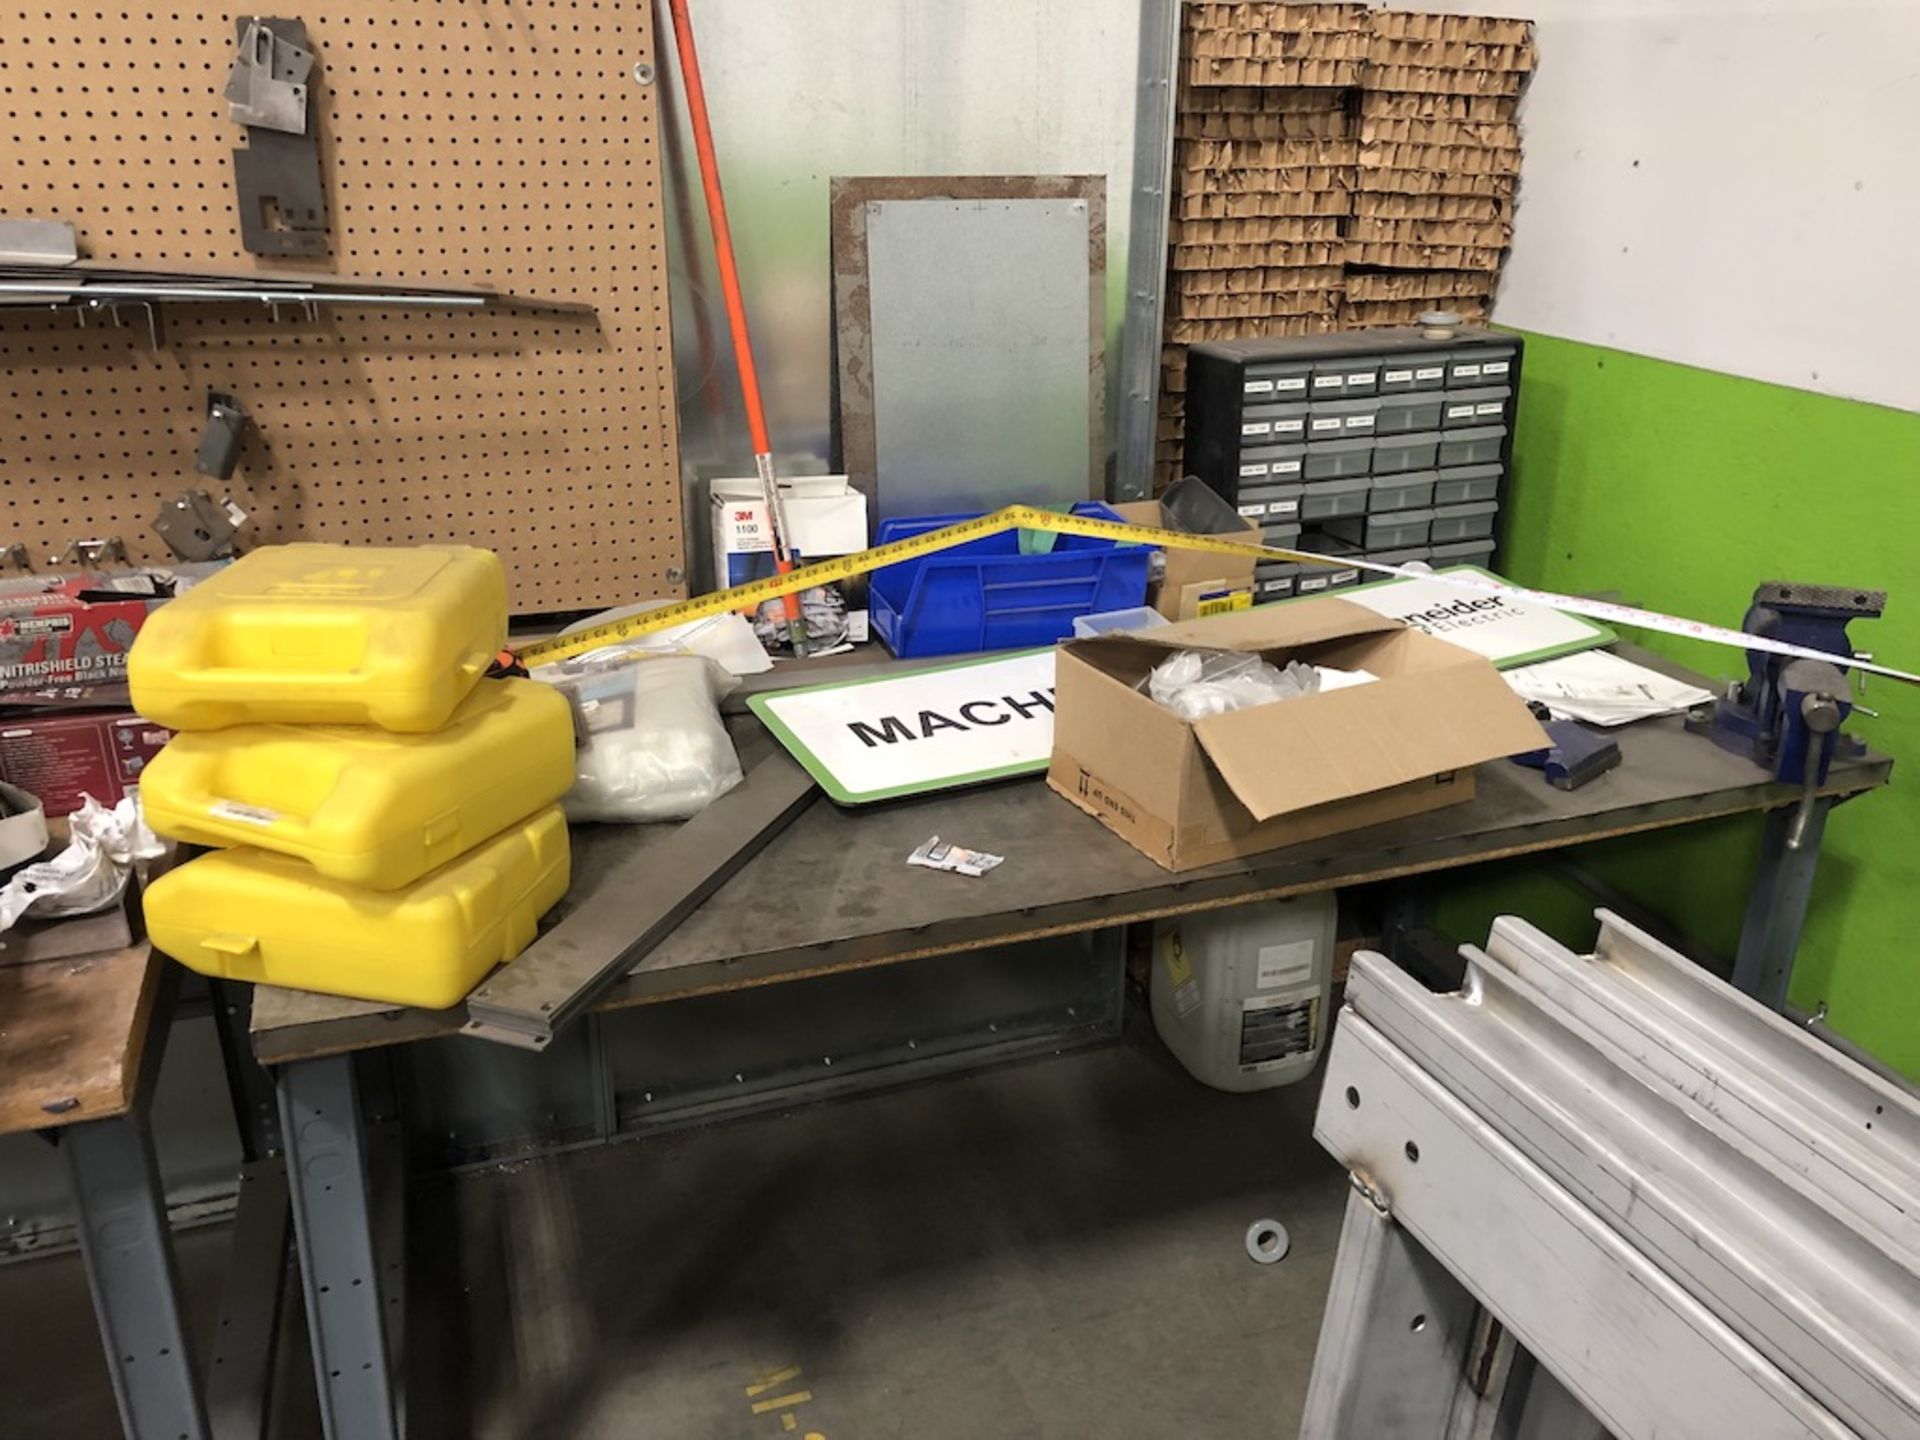 WORK BENCH ( CONTENTS NOT INCLUDED ) 6FT W X 3FT L X 33IN H   SCHNEIDER ELECTRIC- 6611 PRESTON AVE